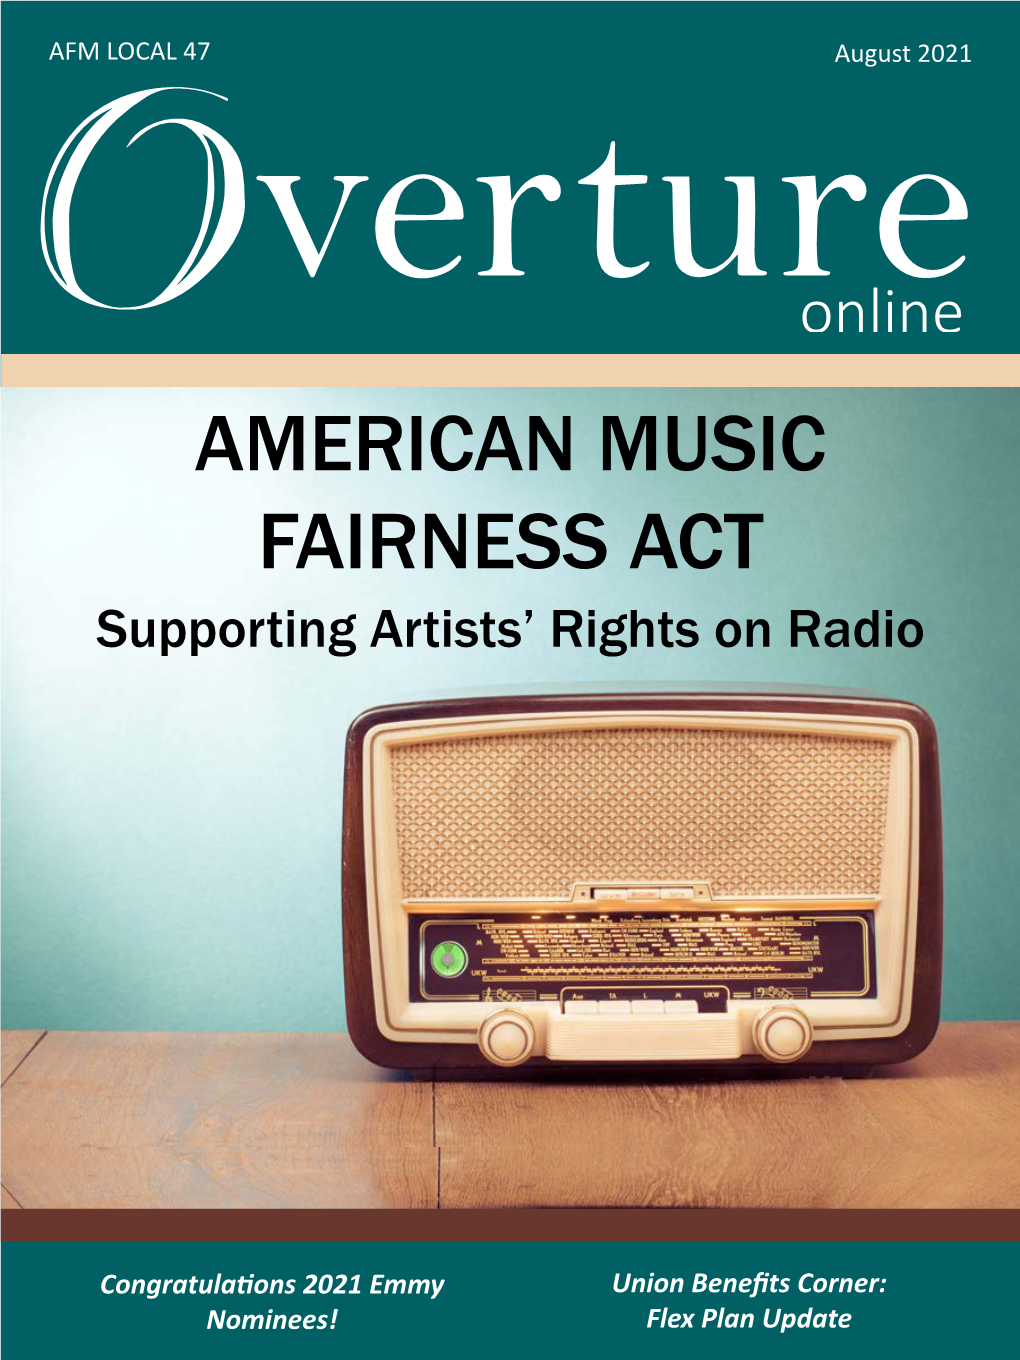 Overture Online, and Will Con- Tinue Email Blasts and Our Local 47 Beat Email Newsletter